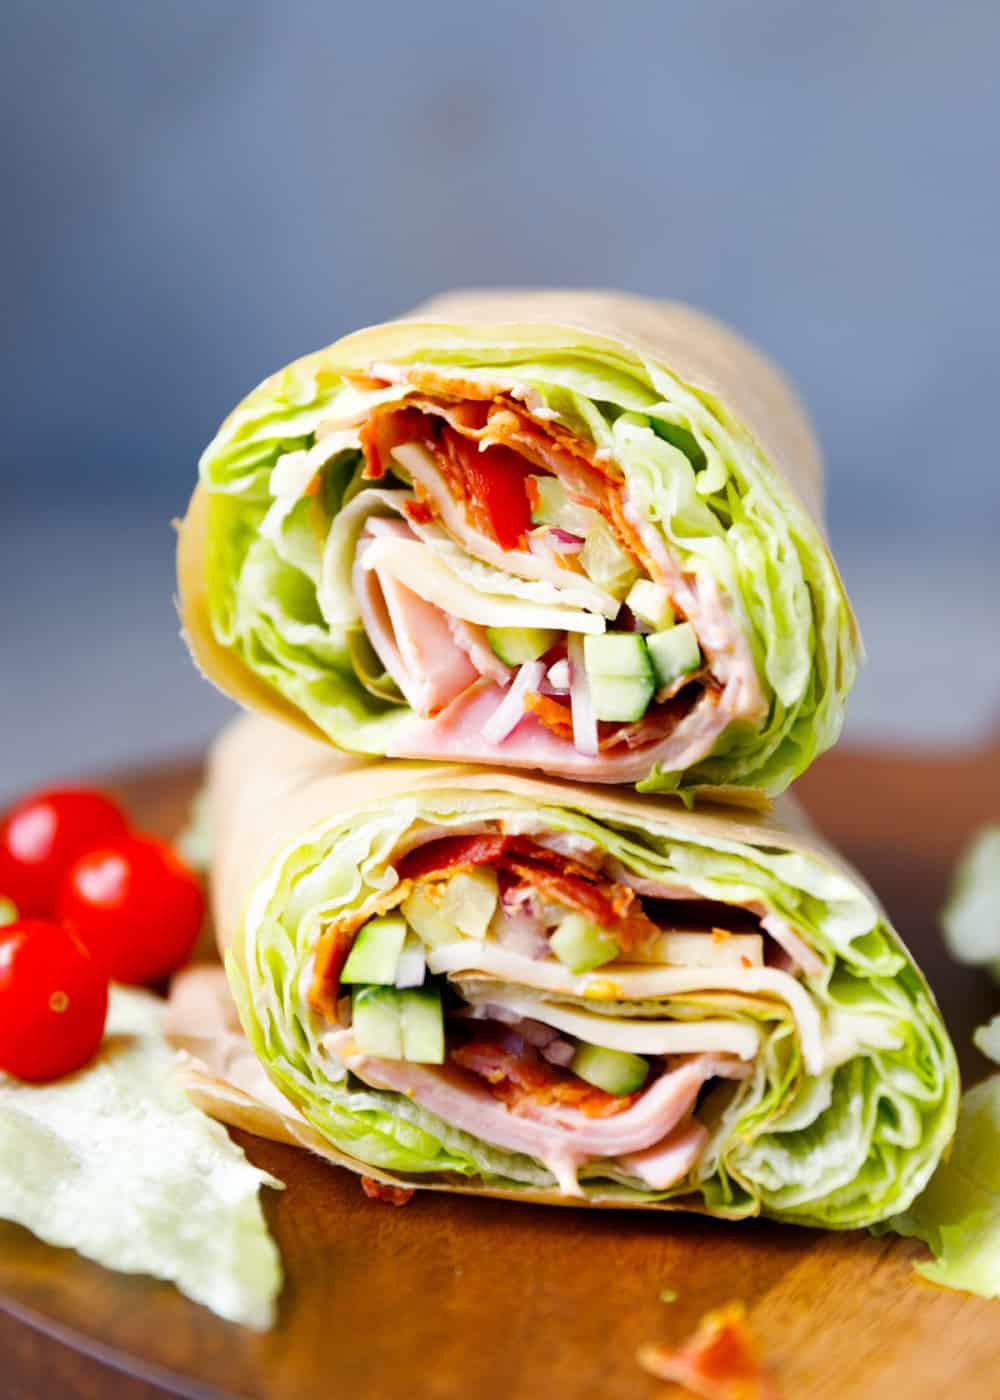 how-to-make-a-lettuce-wrap-sandwich-low-carb-healthy-cooking-lsl